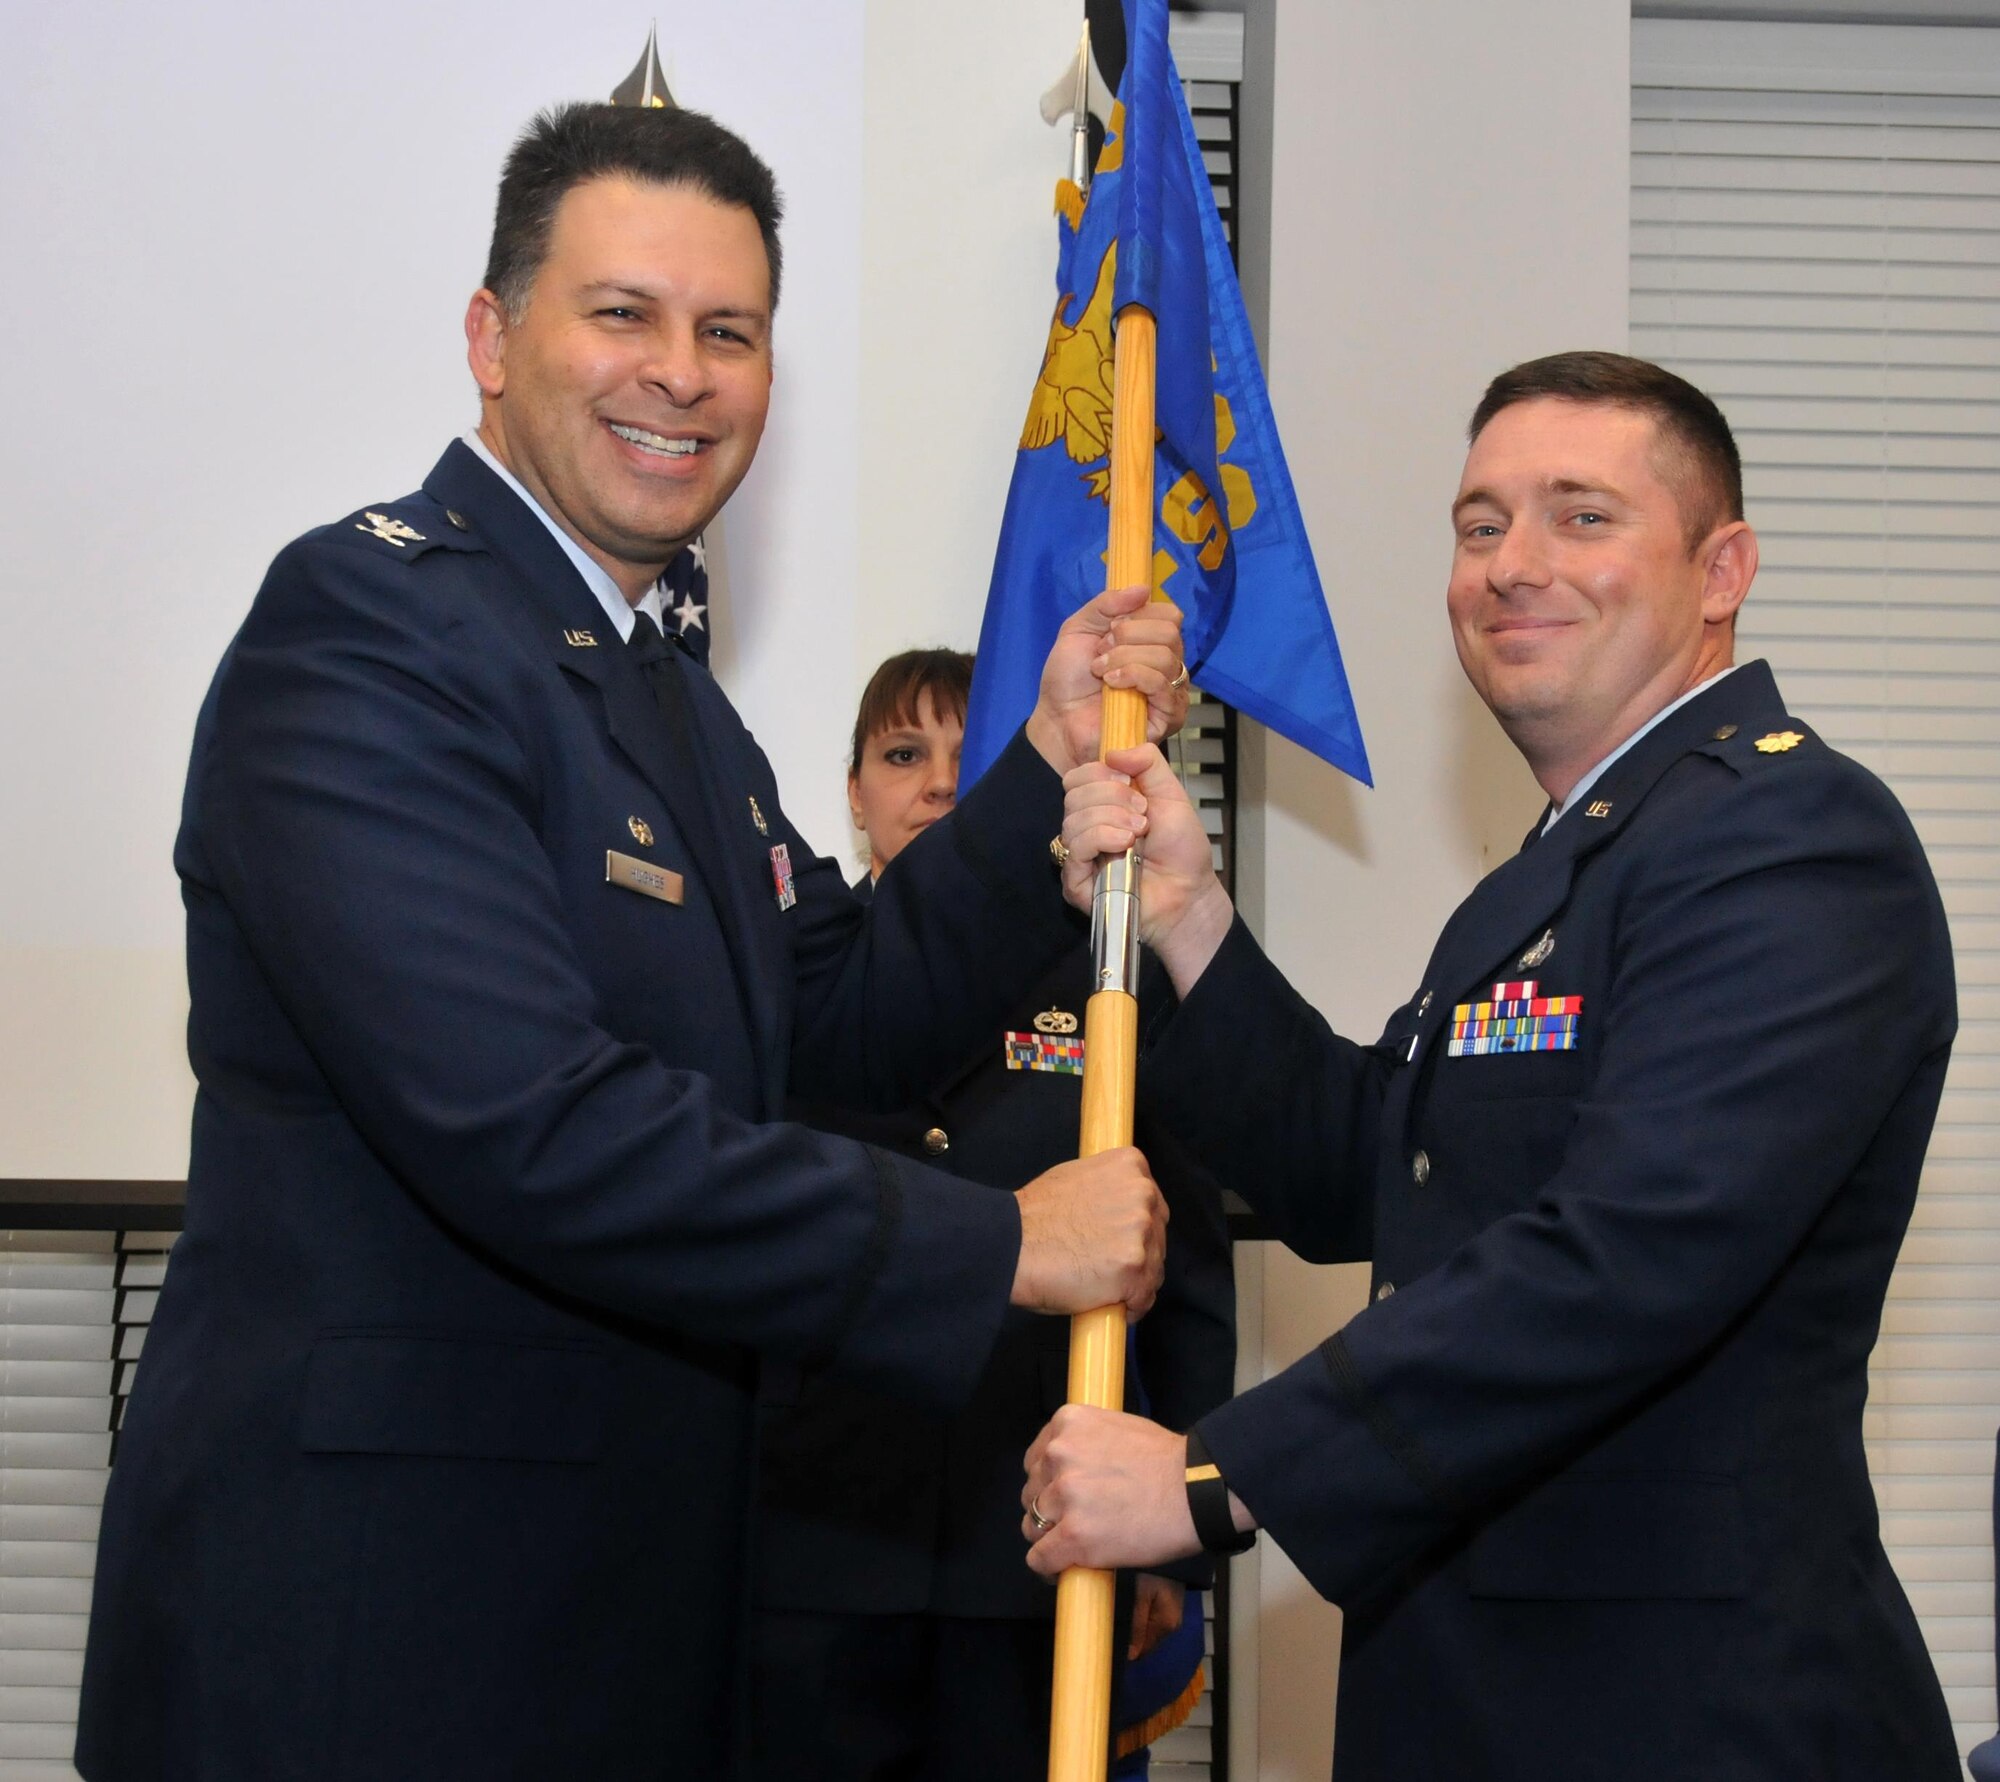 Maj. Wallace Collins receives the 94th Force Support Squadron flag from Col. Marty Hughes, 94th Maintenance Support Group commander, marking the assumption of command for the 94th FSS on Jan. 10, 2016 in Verhulst Hall at Dobbins Air Reserve Base, Ga. (U.S. Air Force photo/ Senior Airman Andrew J. Park)